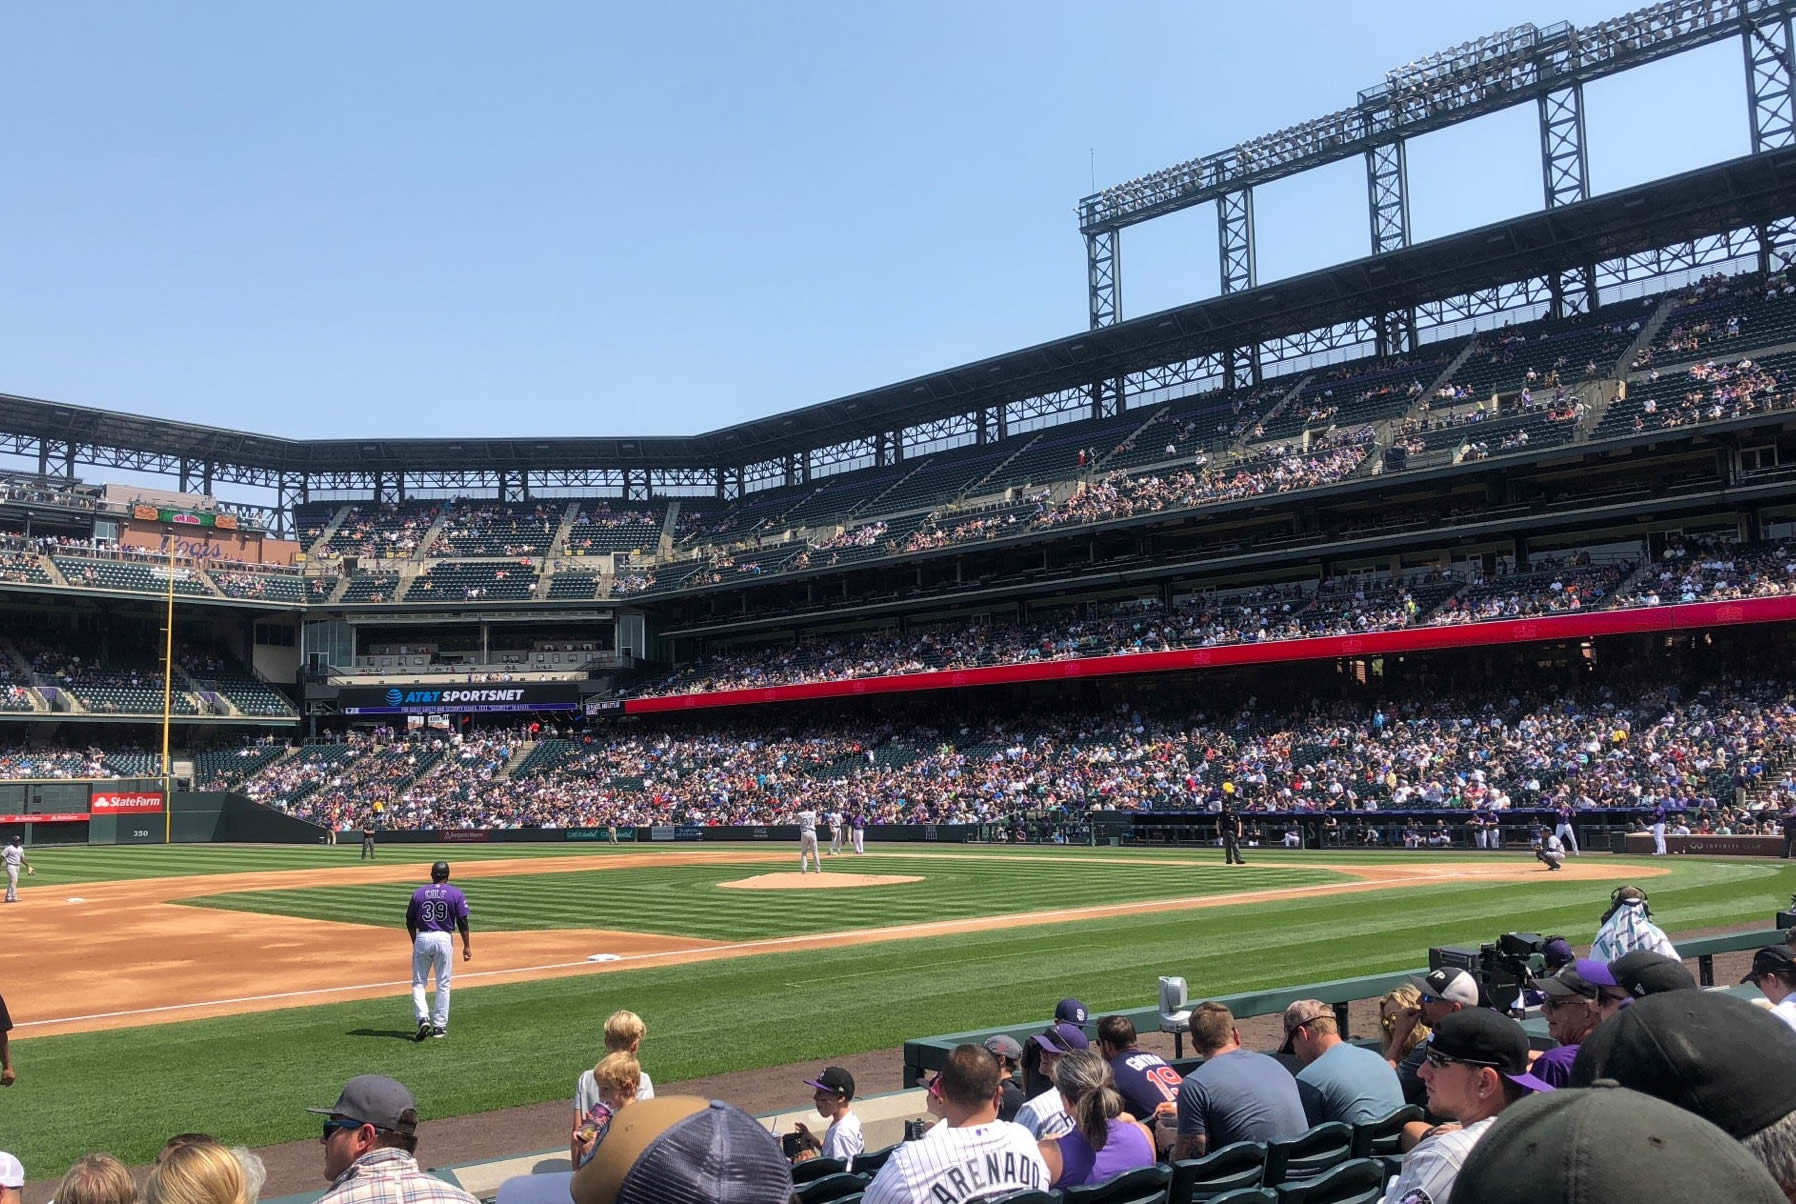 section 141, row 8 seat view  - coors field